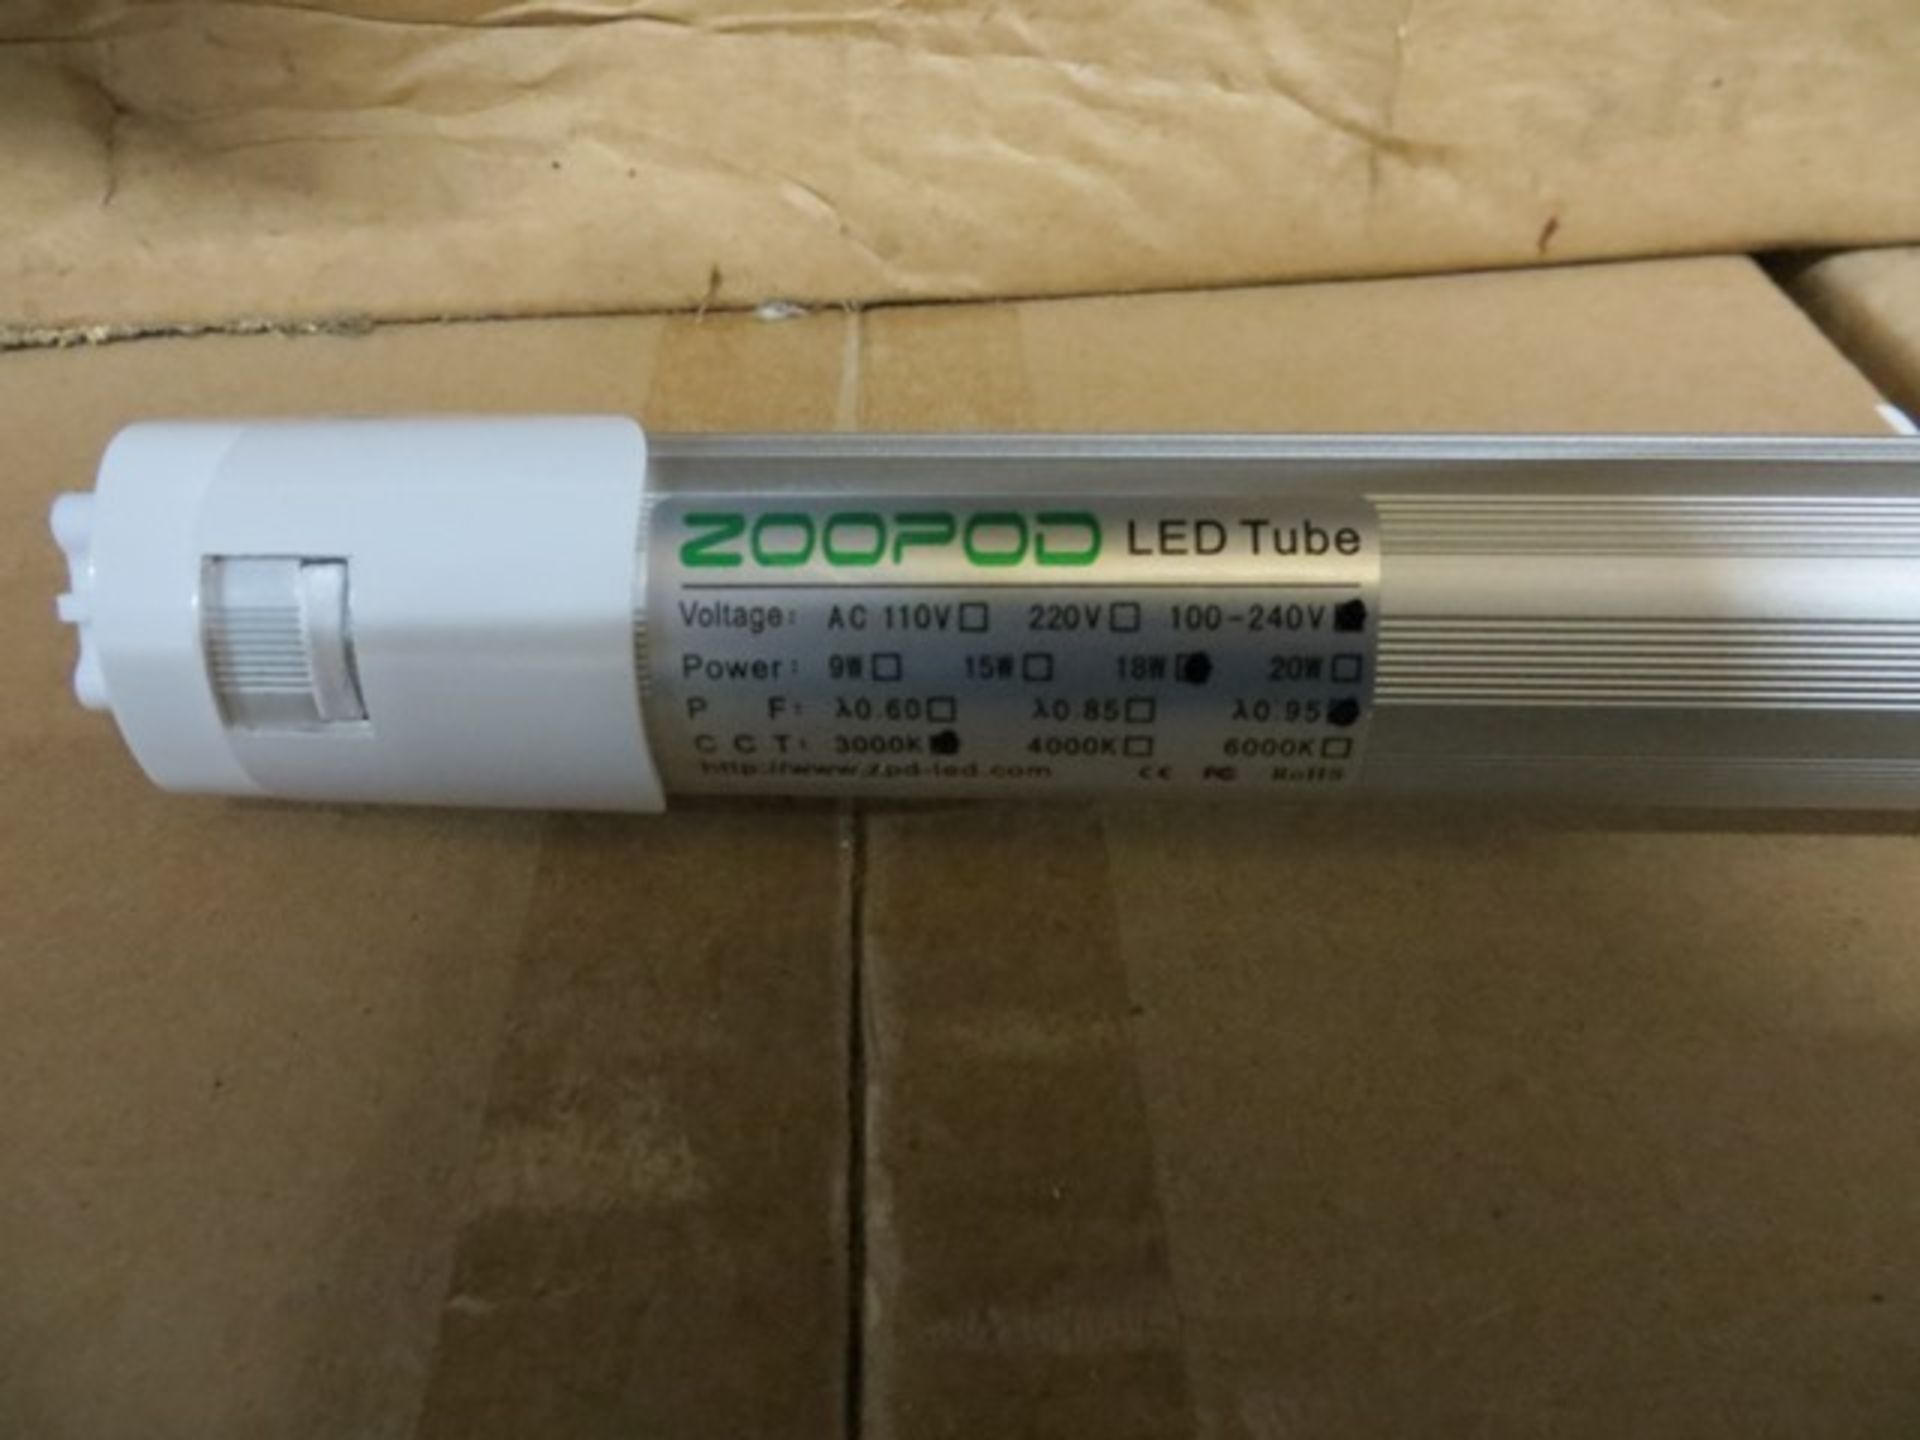 Eight Boxes of Zoopod T8 LA00177 Energy Saving 4' LED Strip Lights 18W 3000K Box of 10Please note: